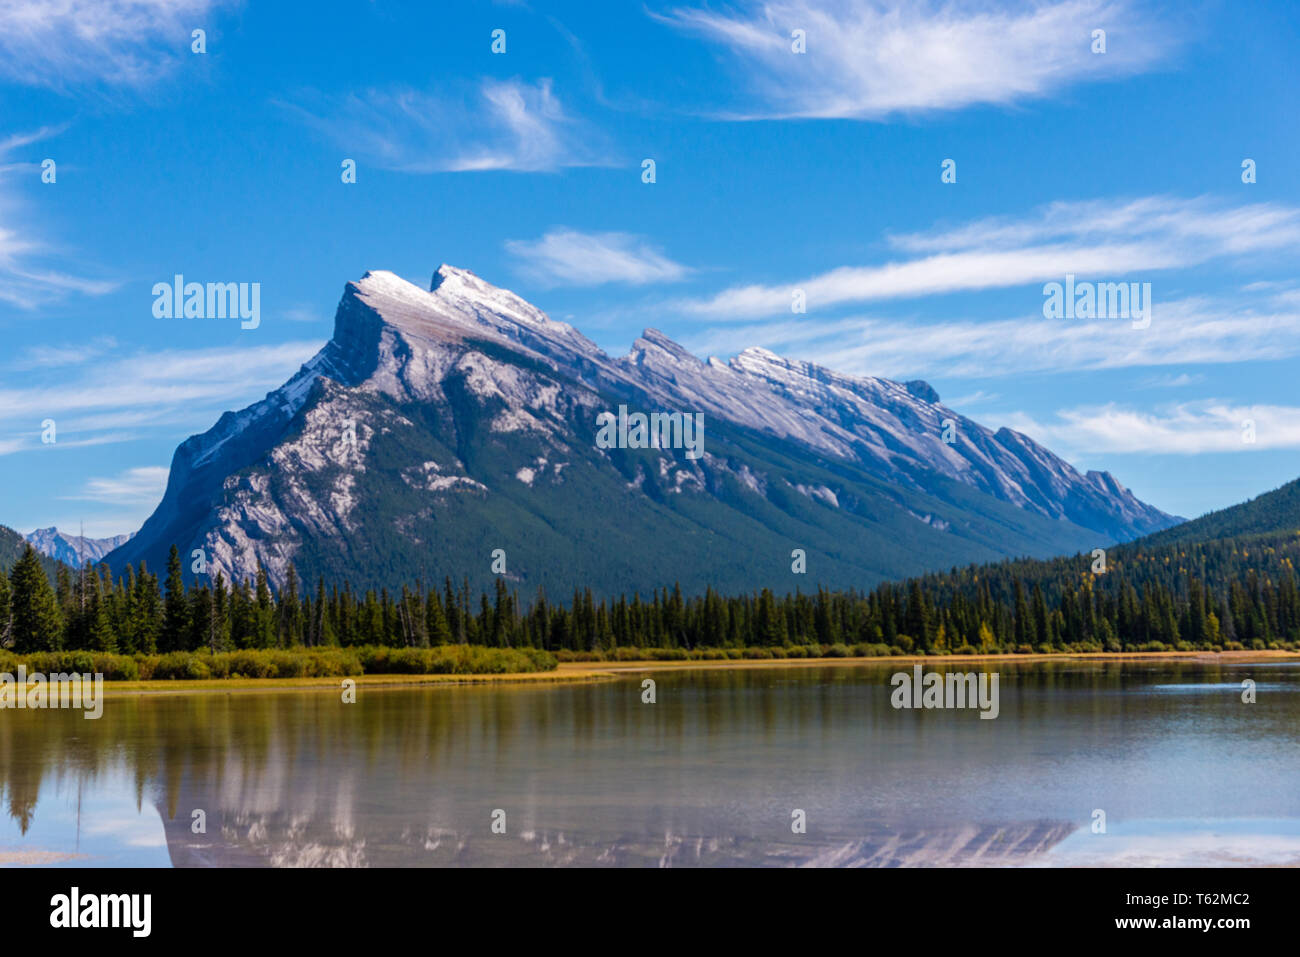 Banff National Park, Alberta, Canada / Septeber 14, 2016: Mount Rundle  reflected in in the still waters of Vermillion Lake in Banff National Park, Al Stock Photo